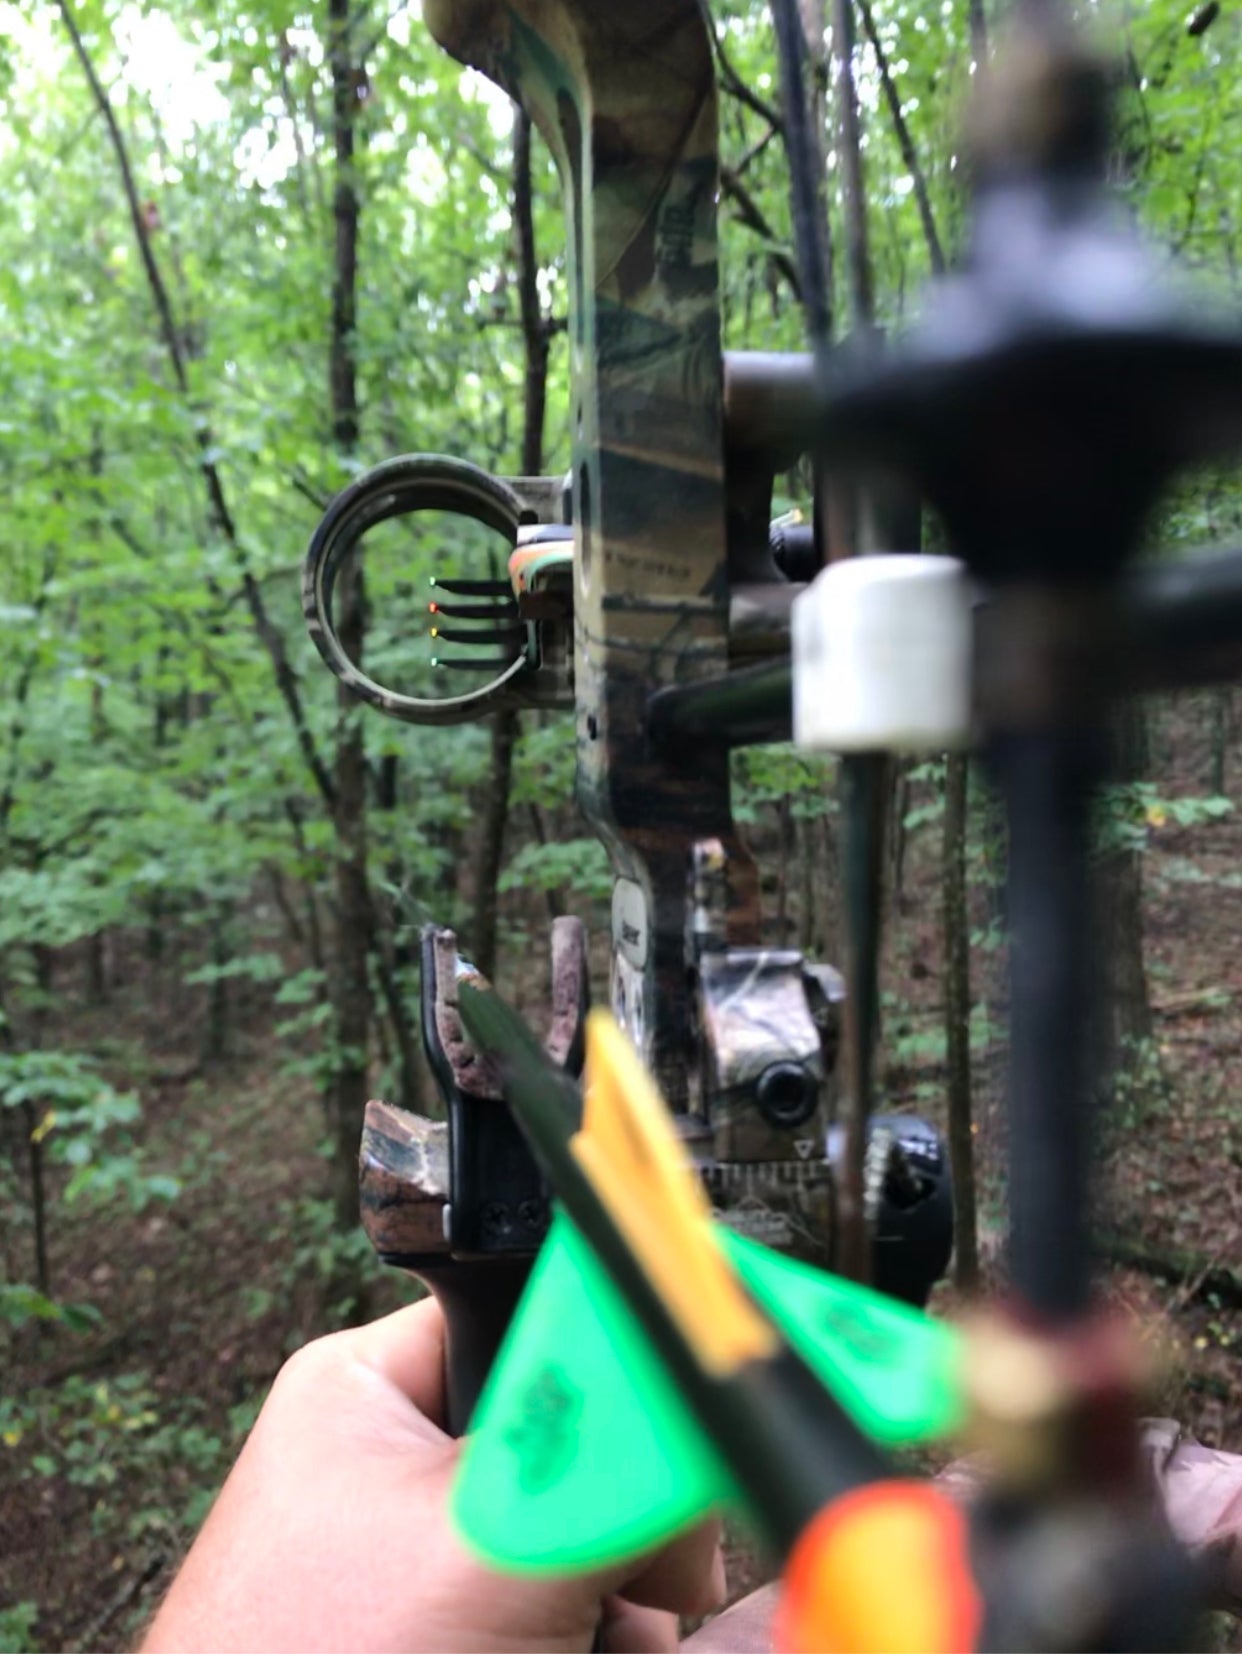 Bowhunting the "Brute 6" Buck